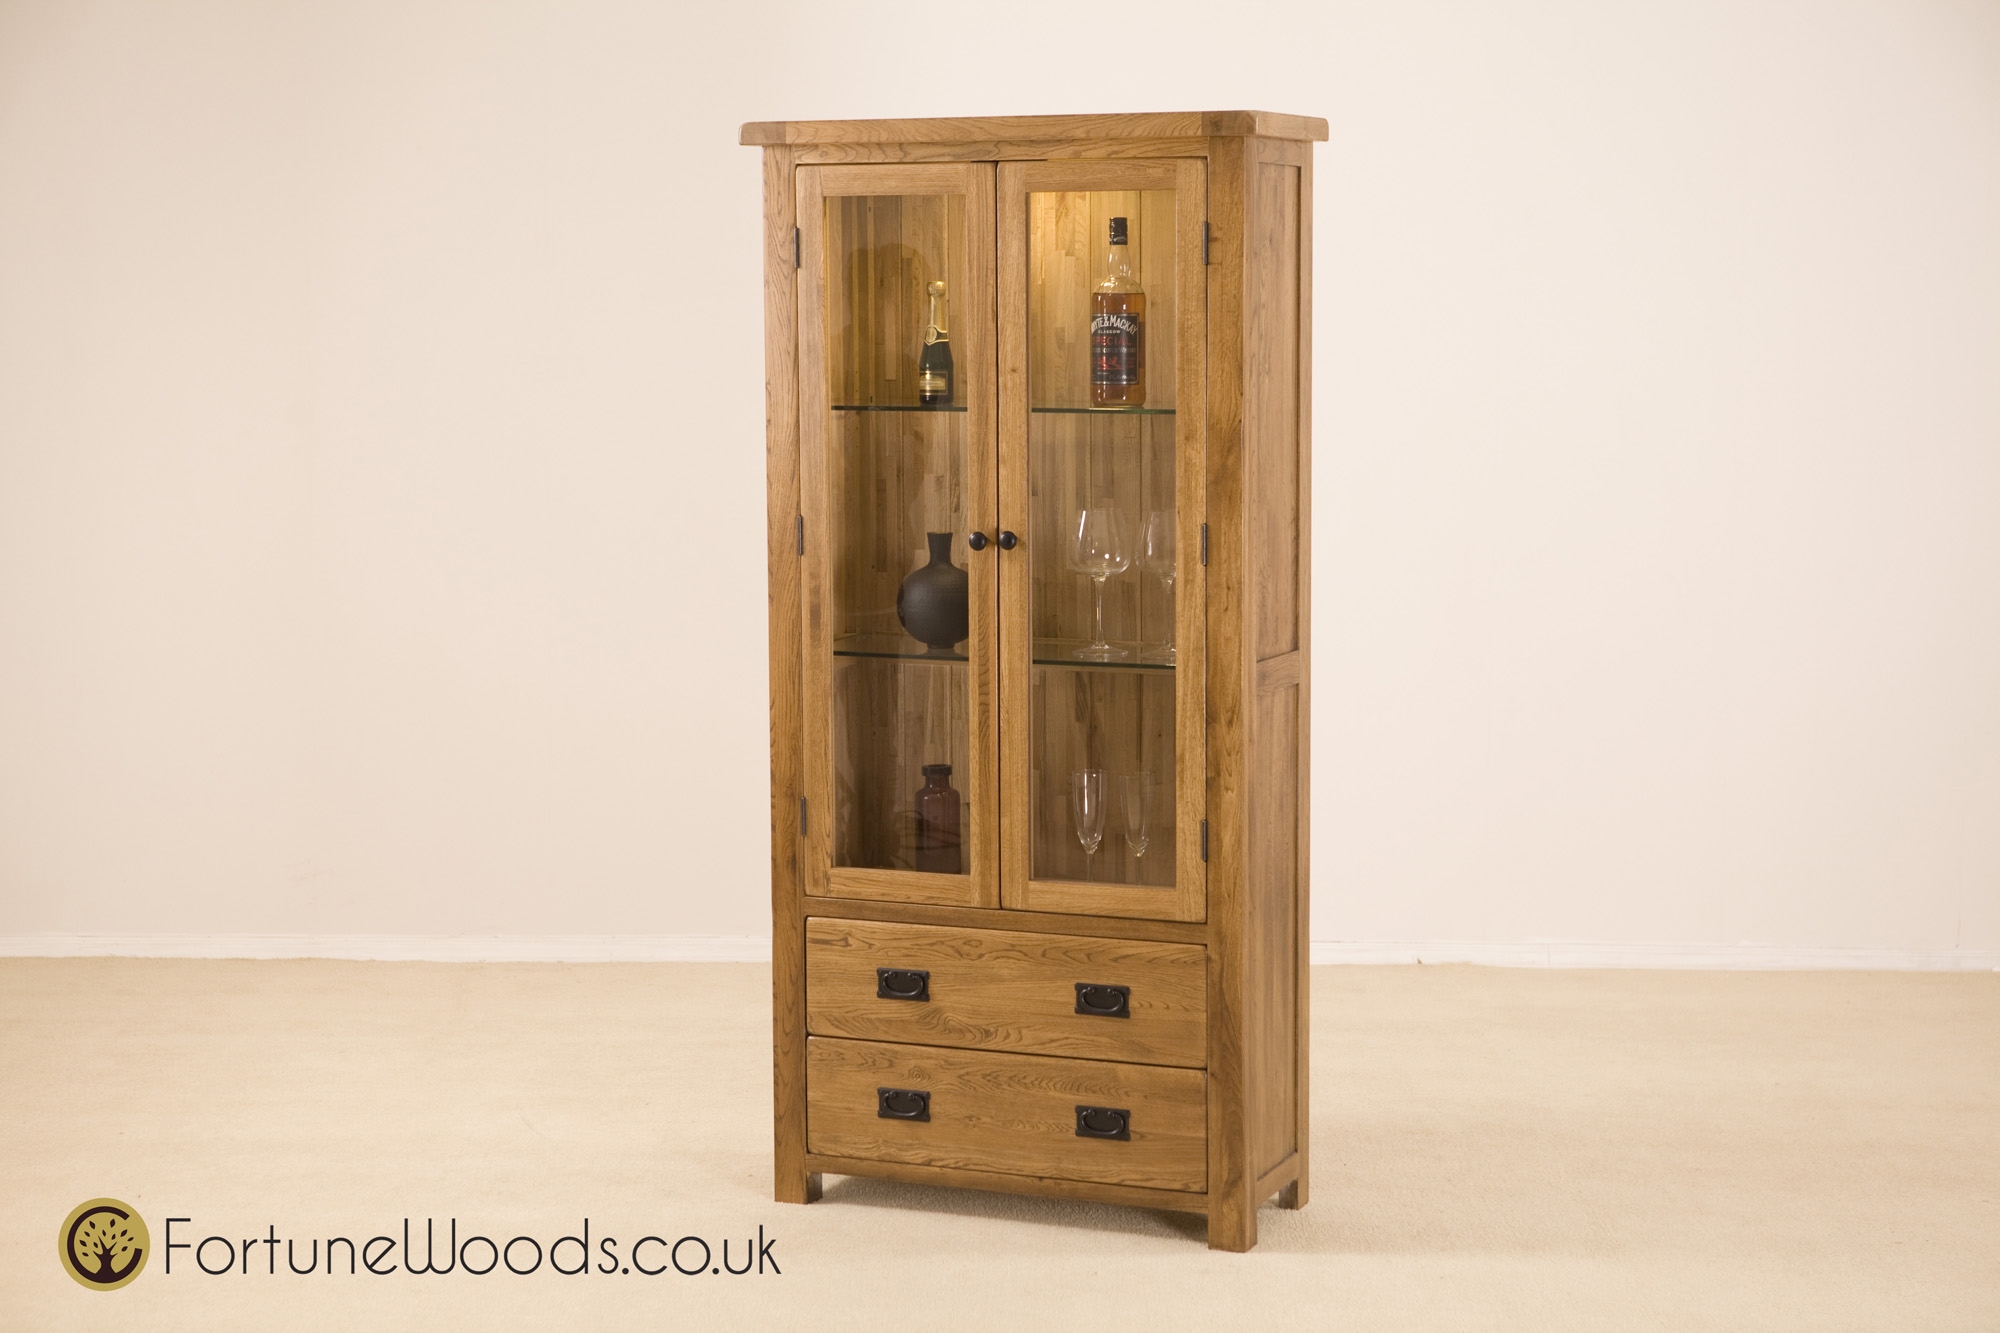 Fortune Woods Rustic Glass Display Cabinet